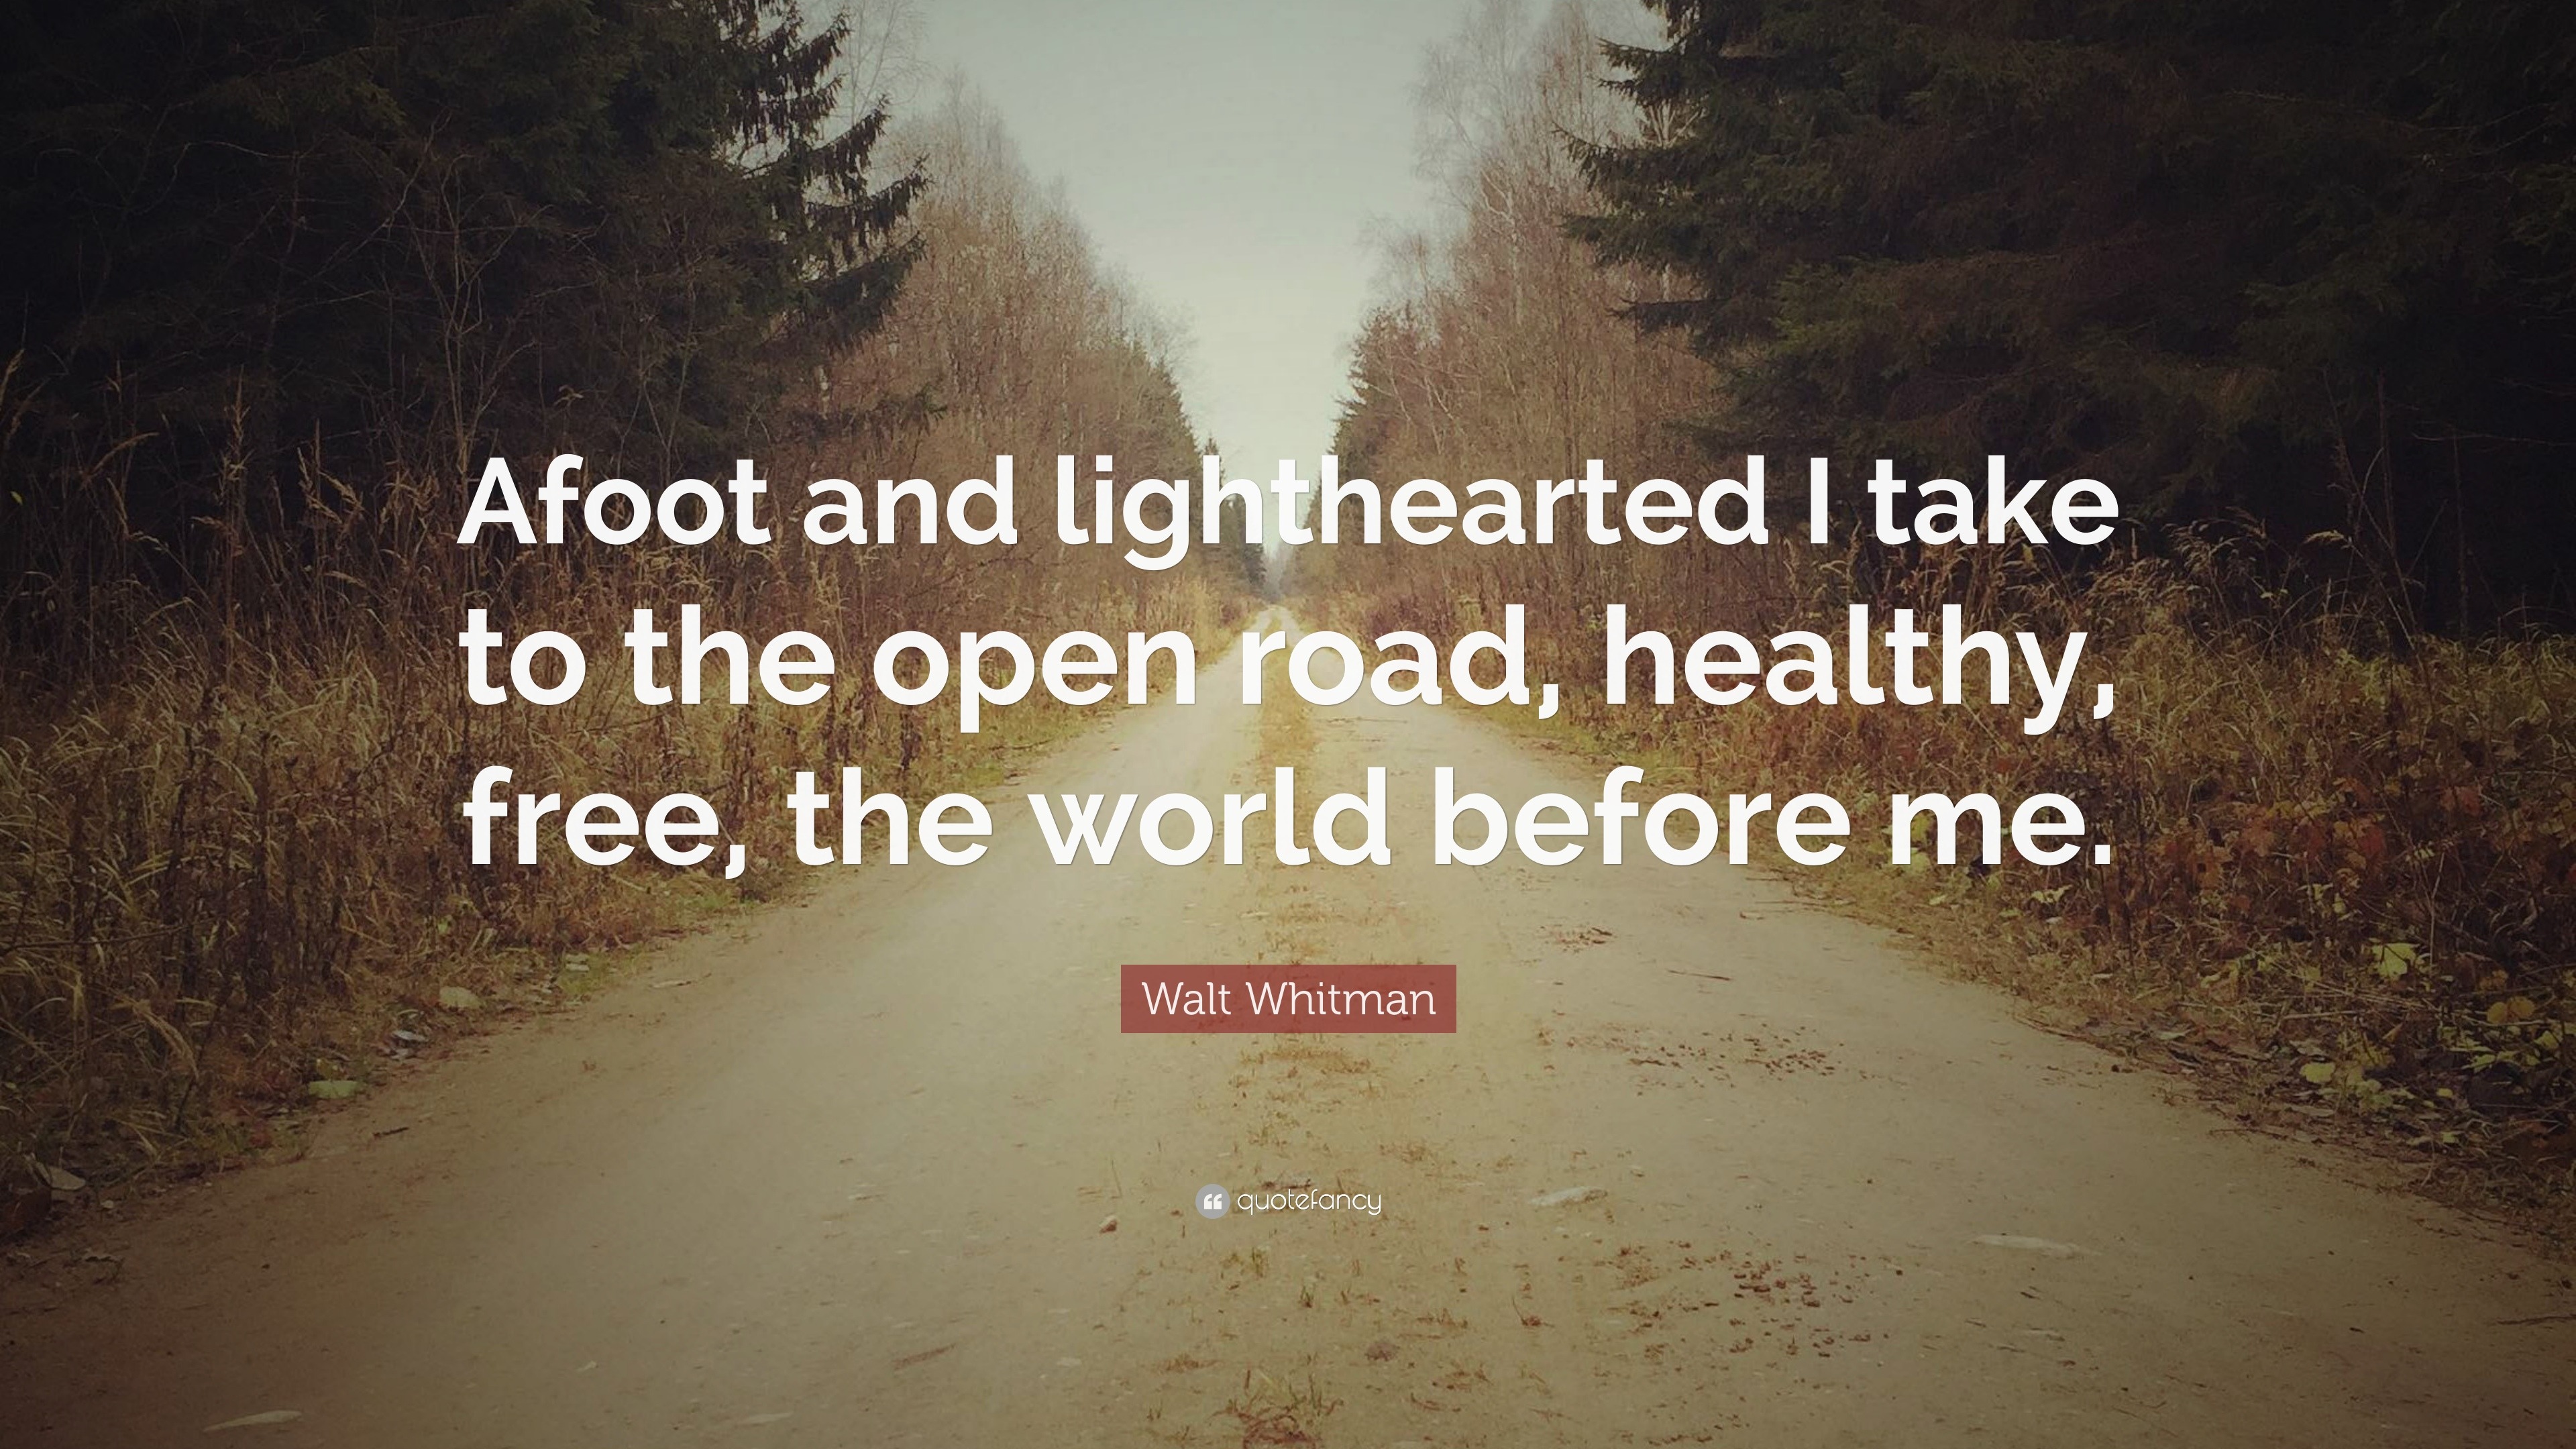 Walt Whitman Quote “Afoot and lighthearted I take to the open road healthy